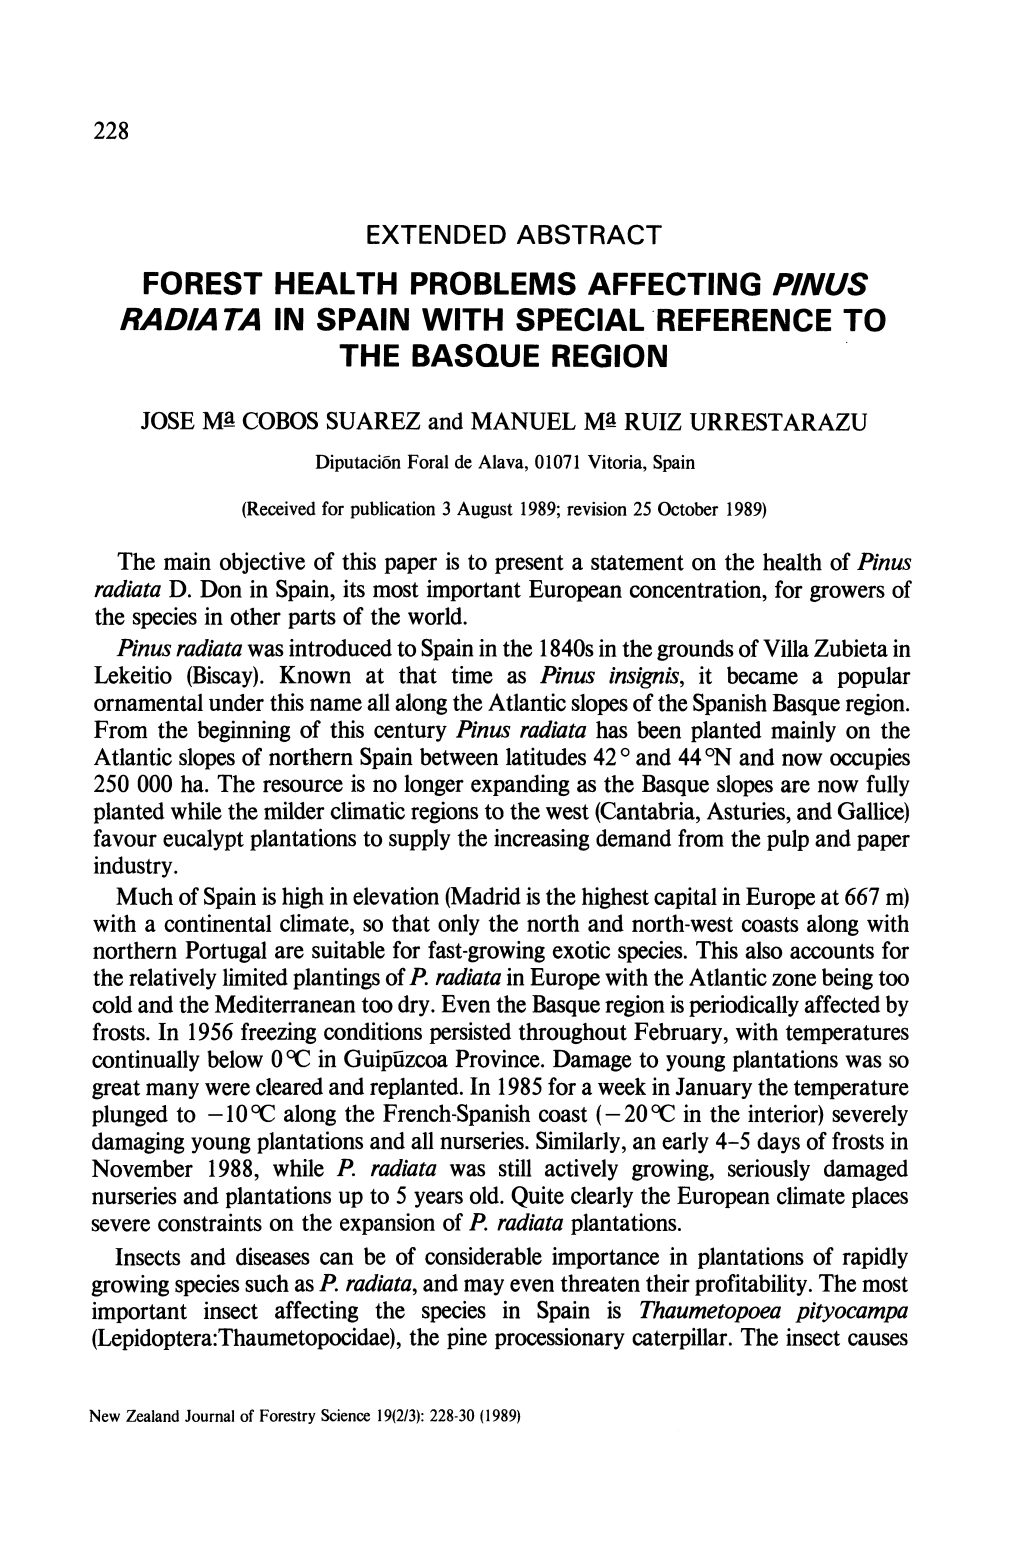 Forest Health Problems Affecting Pinus Radiata in Spain with Special Reference to the Basque Region